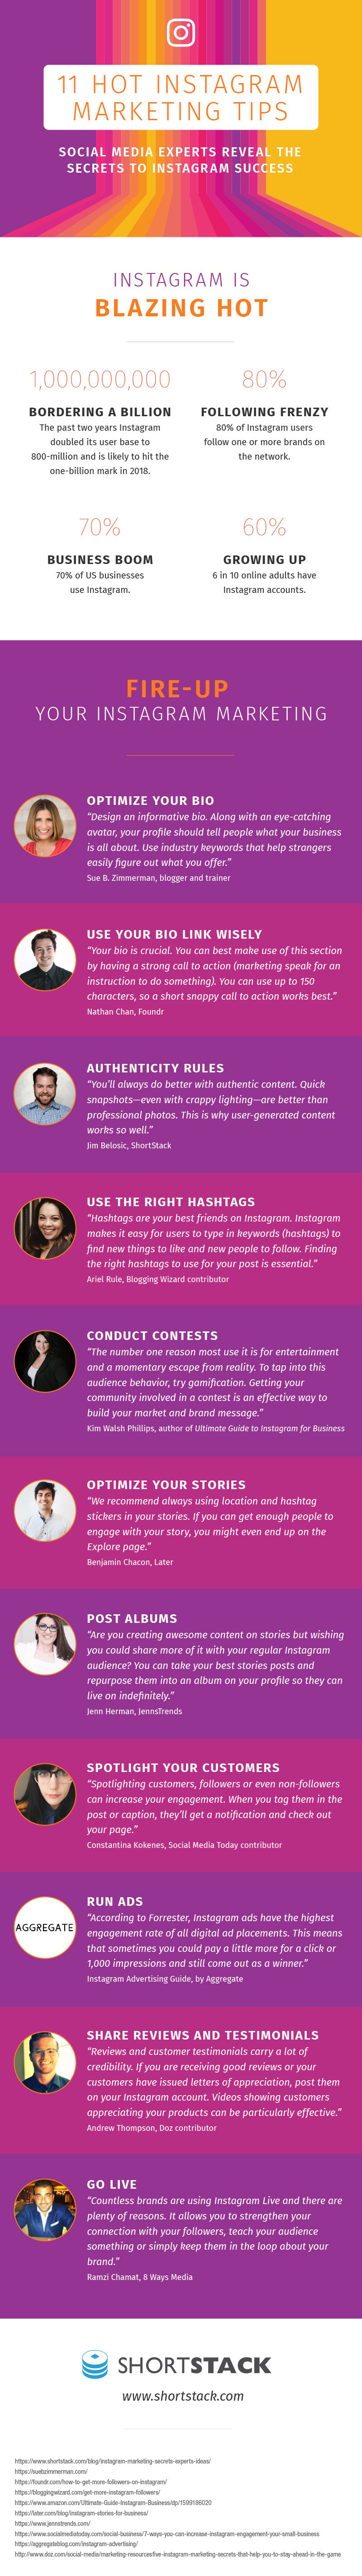 Instagram Marketing Tips from the Experts, infographic